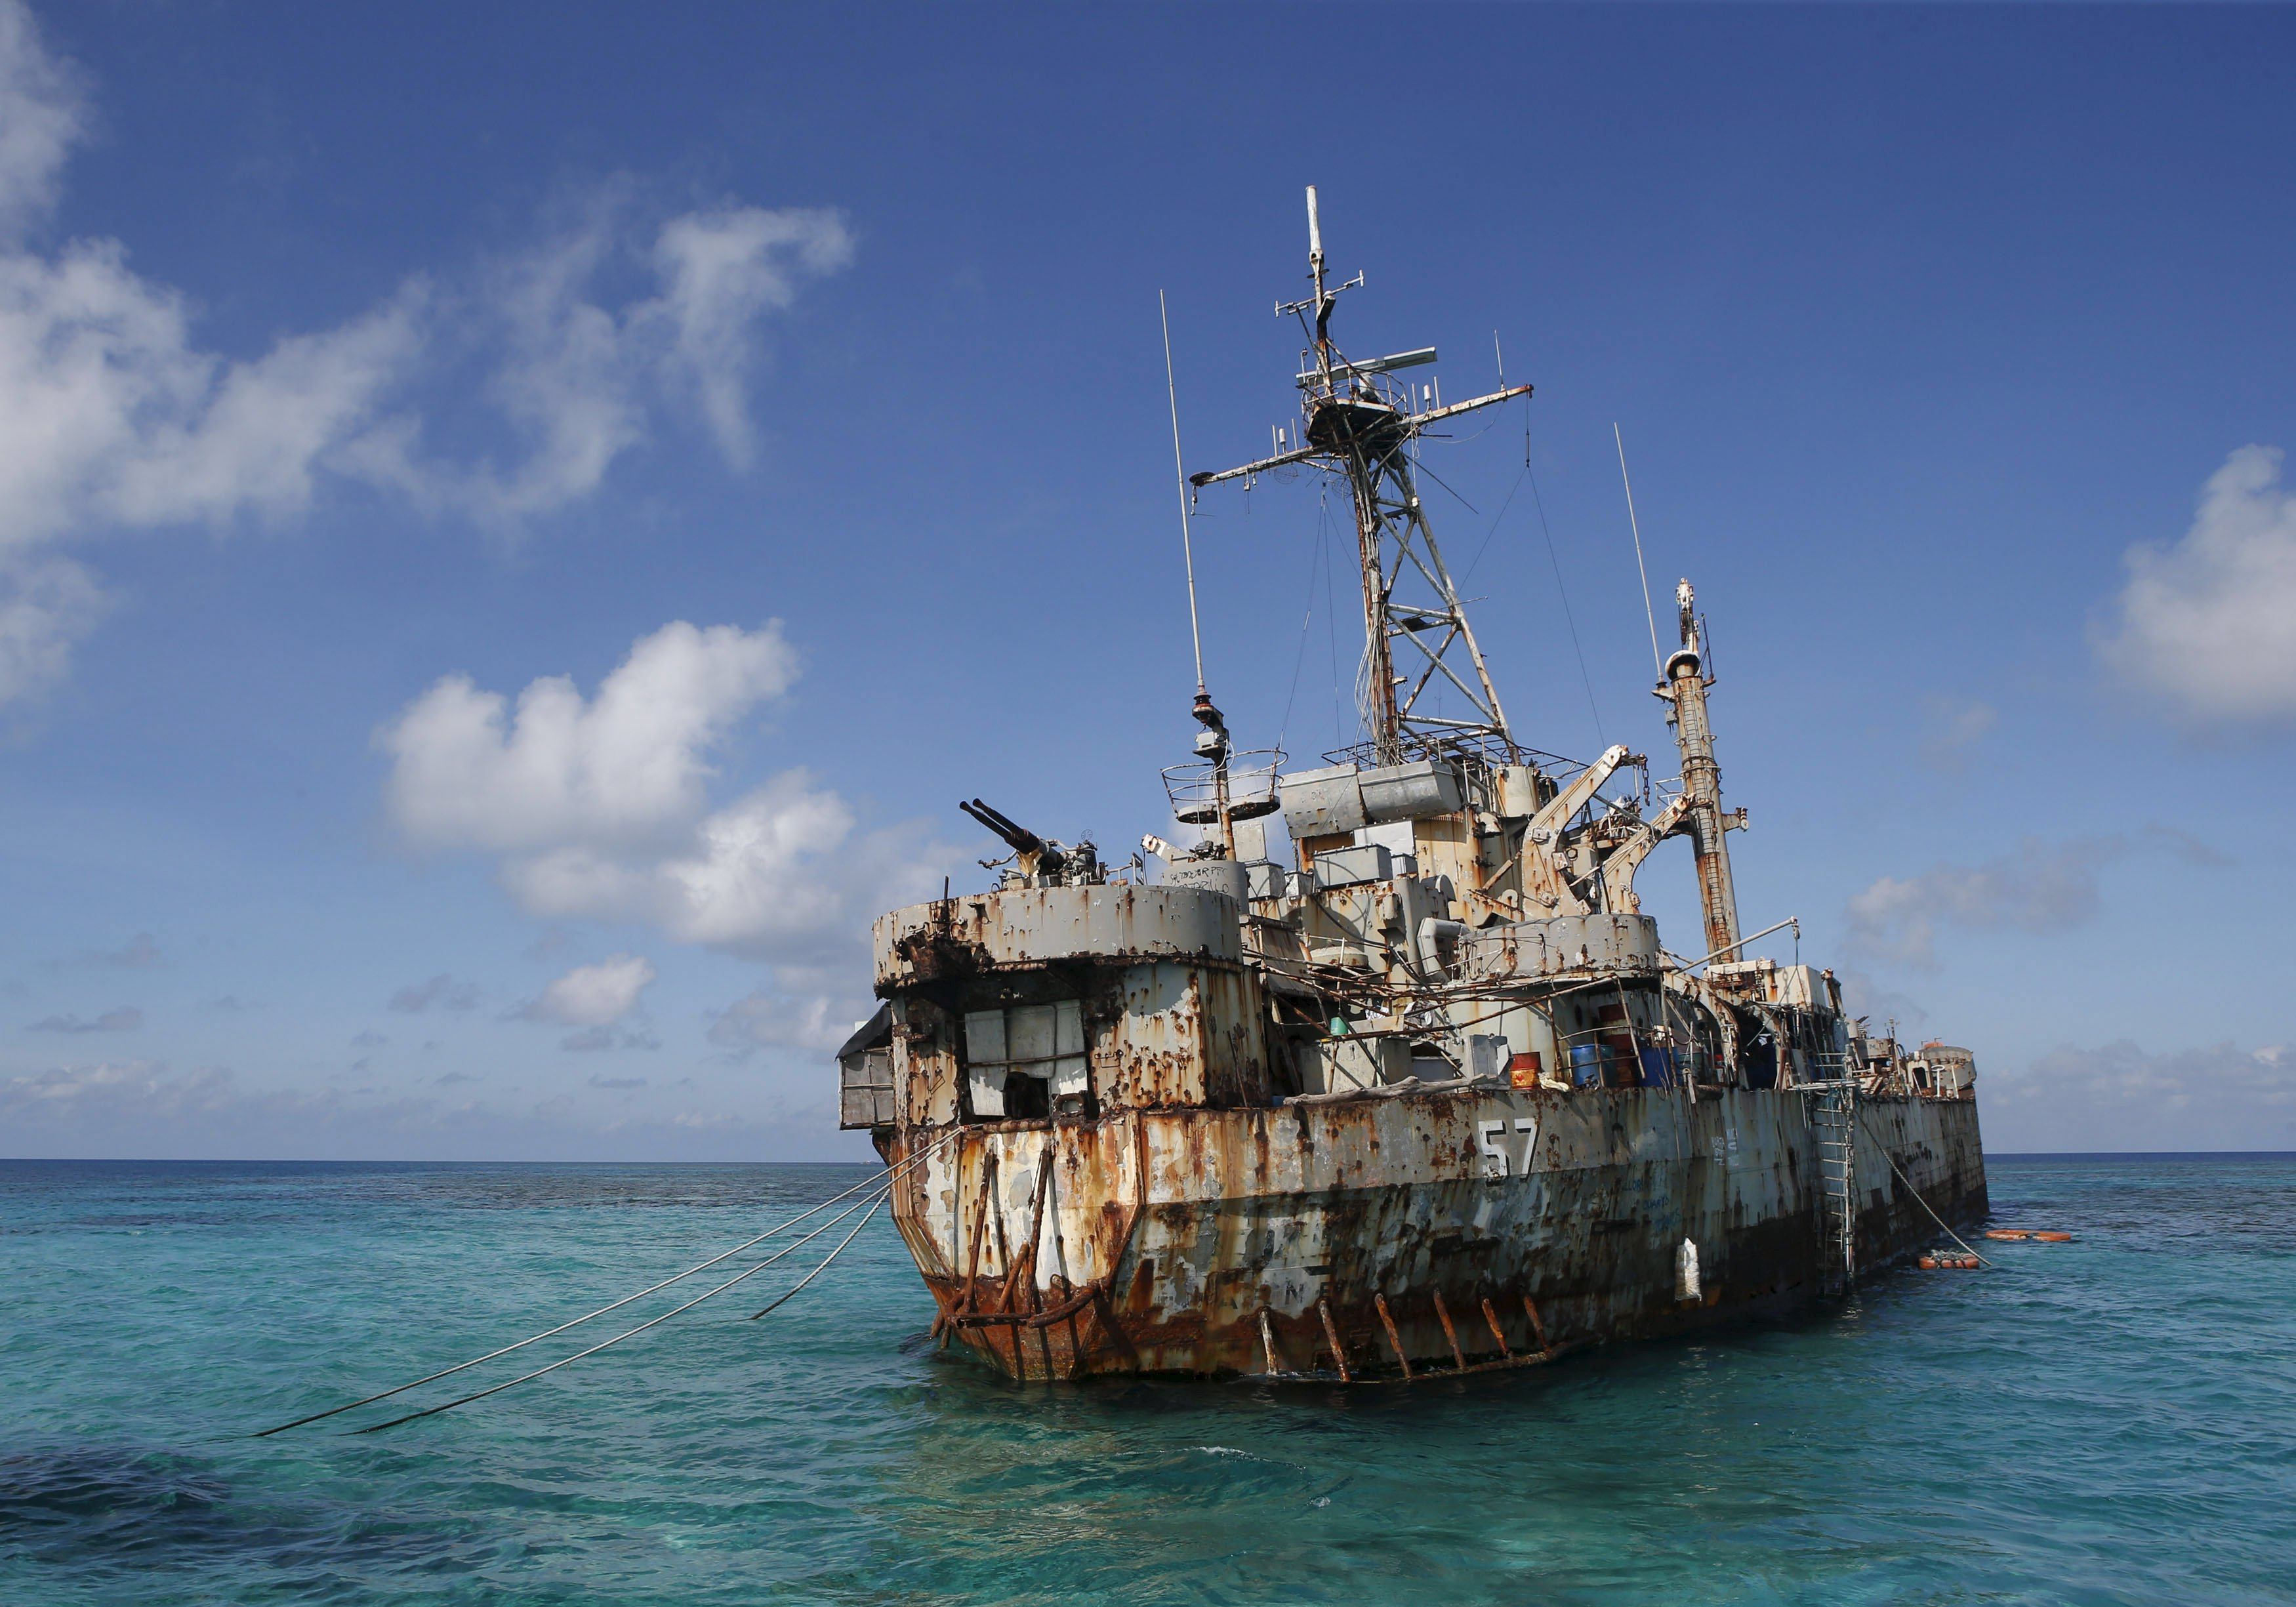 The BRP Sierra Madre was grounded on Second Thomas Shoal in 1999. Photo: Reuters